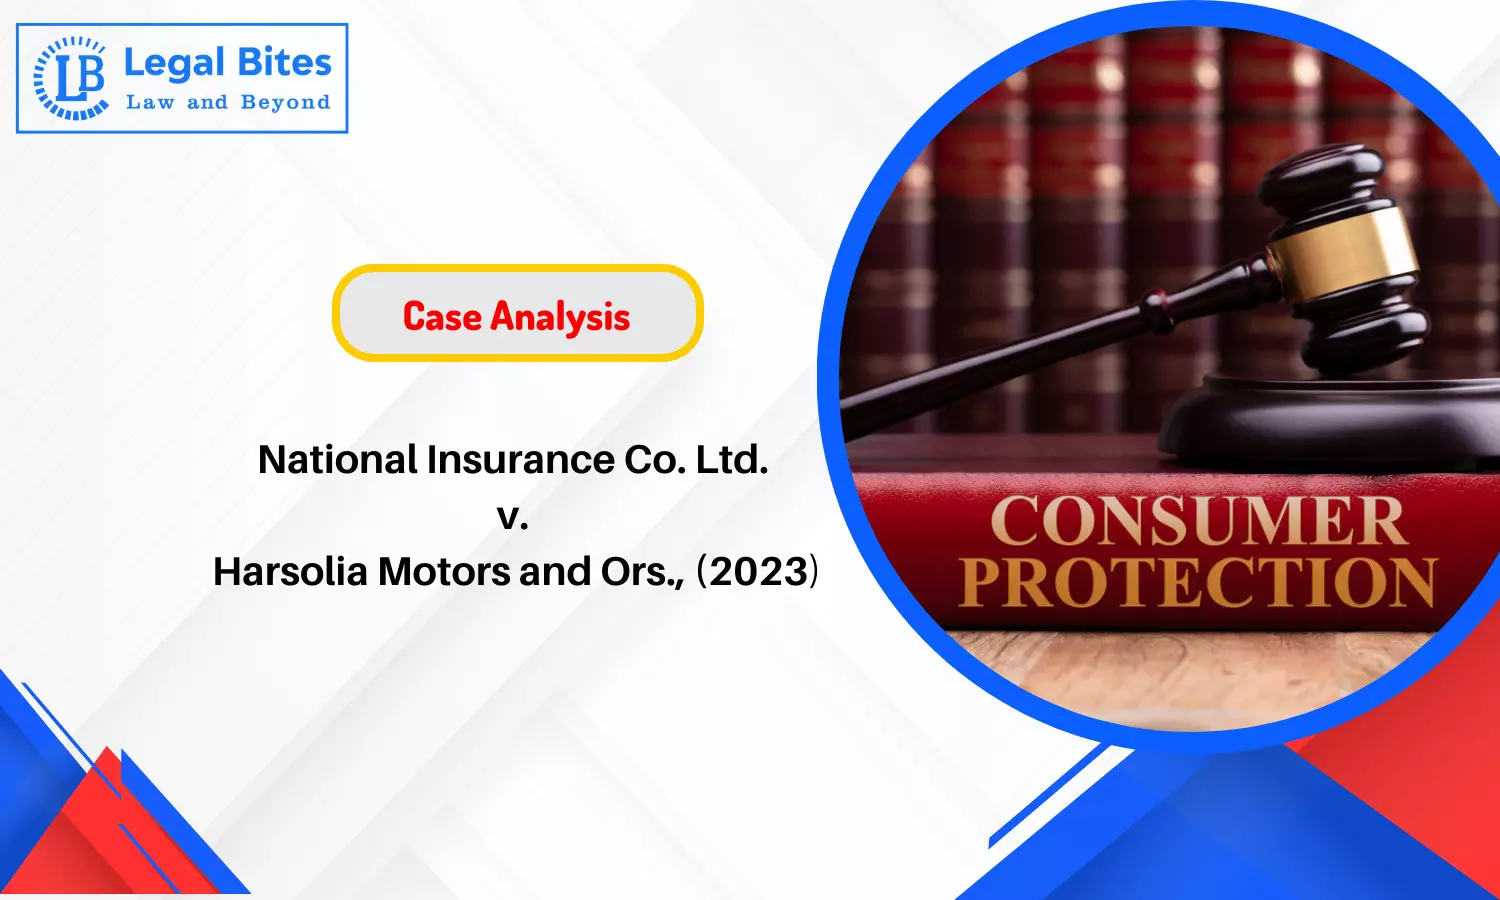 Case Analysis: National Insurance Co. Ltd. v. Harsolia Motors and Ors., (2023) | Consumer Protection Act, 1986